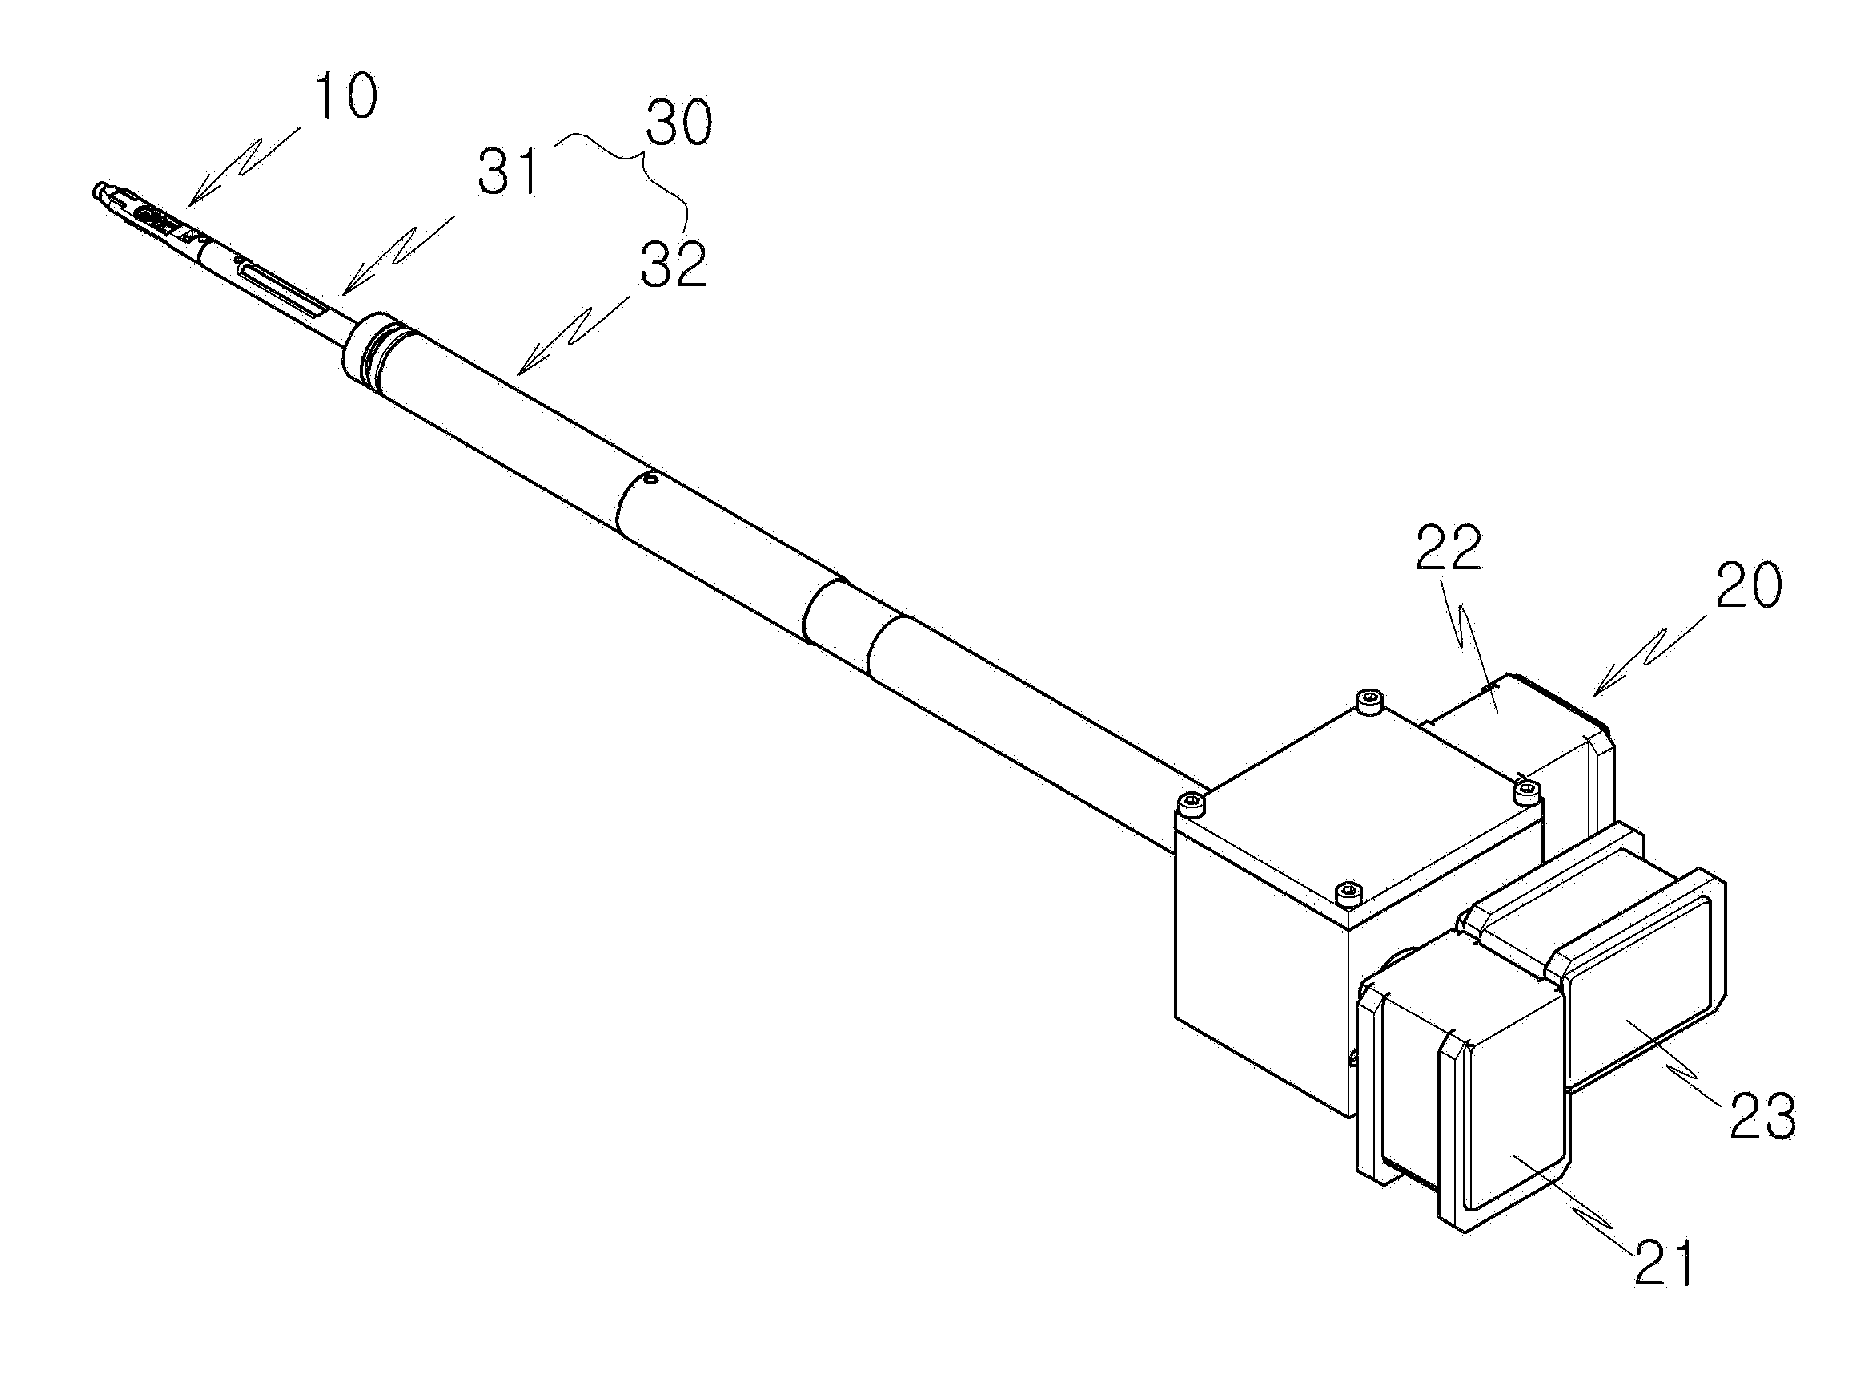 Specimen holder with 3-axis movement for tem 3D analysis